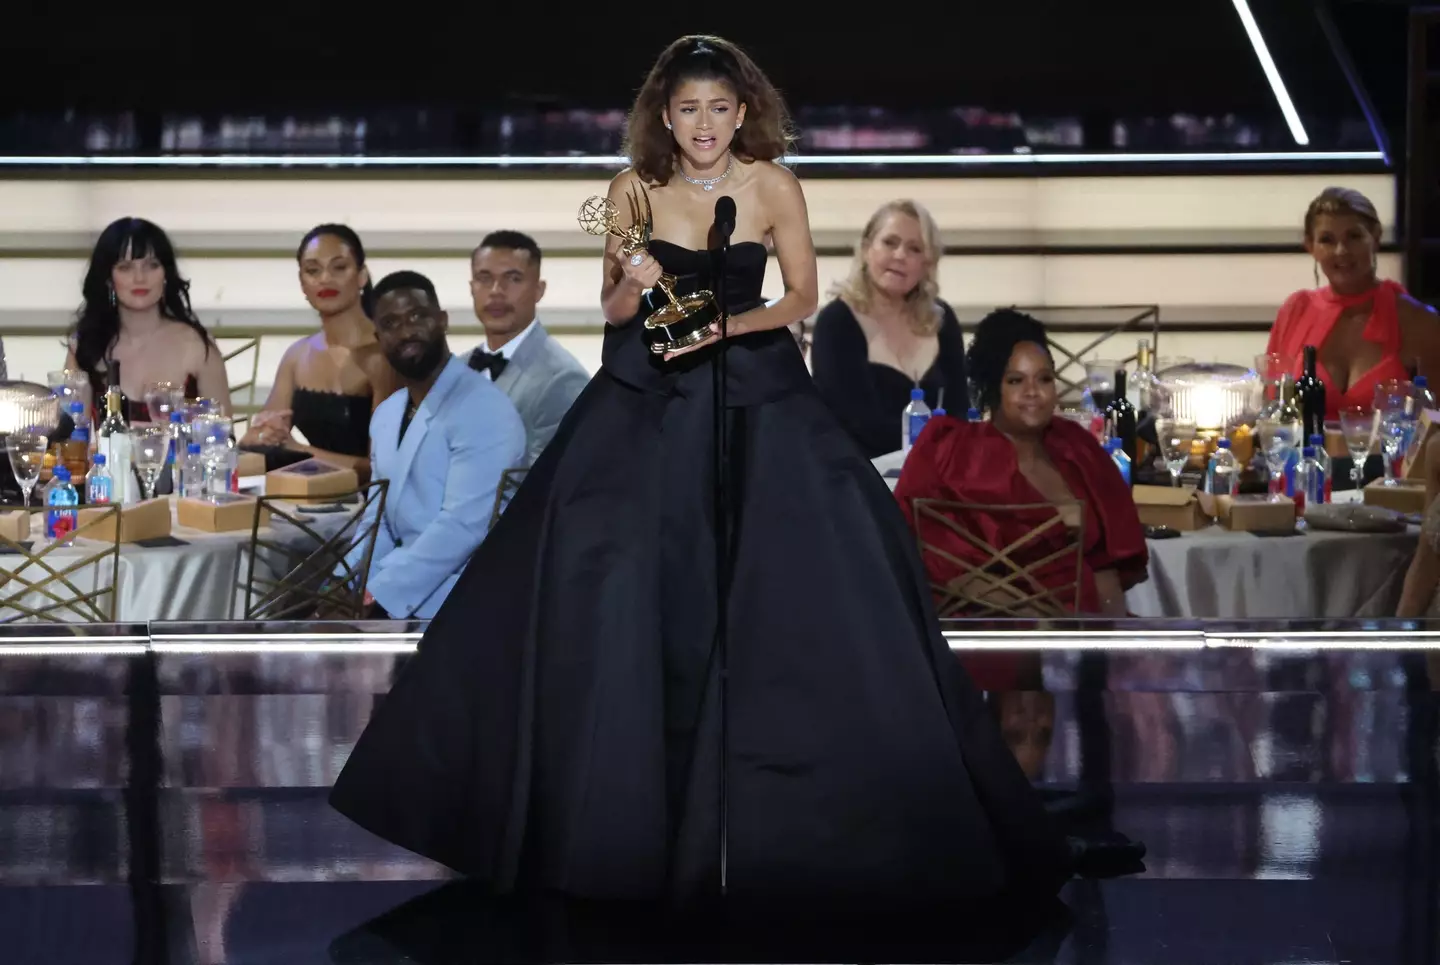 Zendaya accepts the award for Outstanding Lead Actress in a Drama Series.